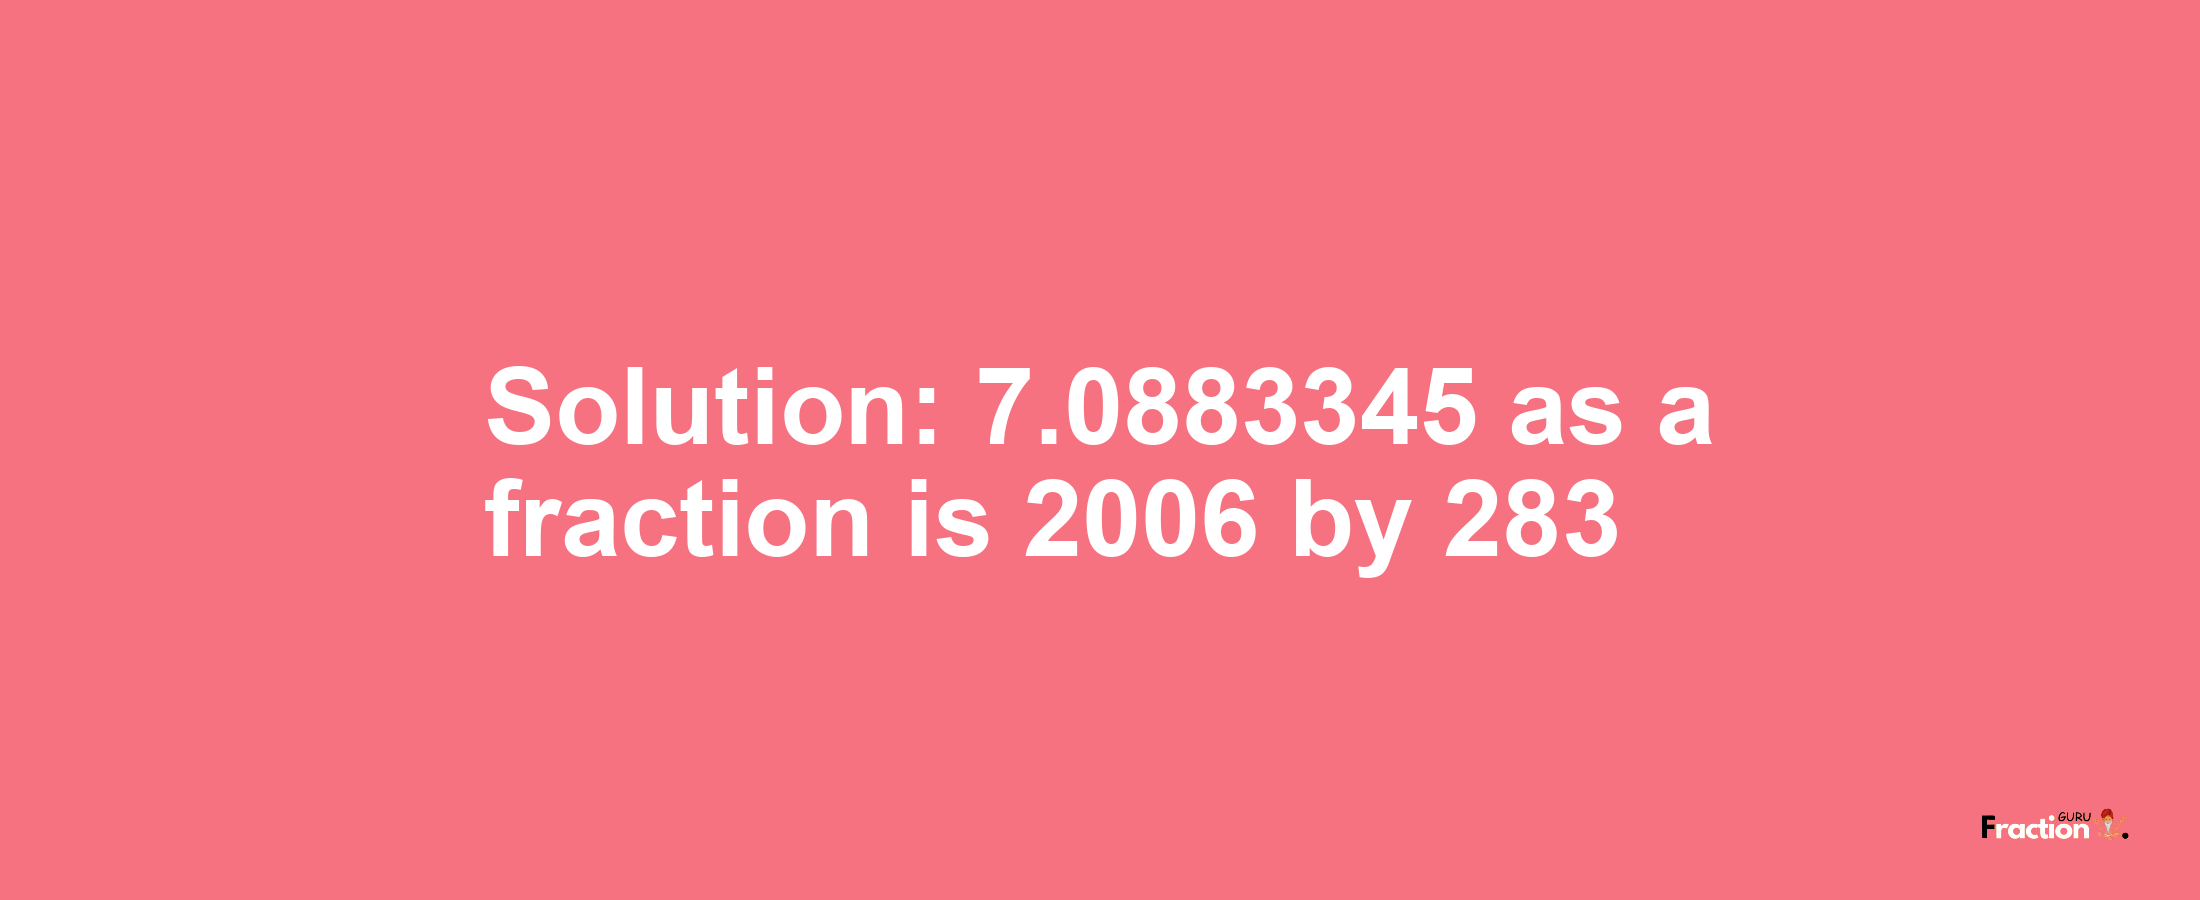 Solution:7.0883345 as a fraction is 2006/283